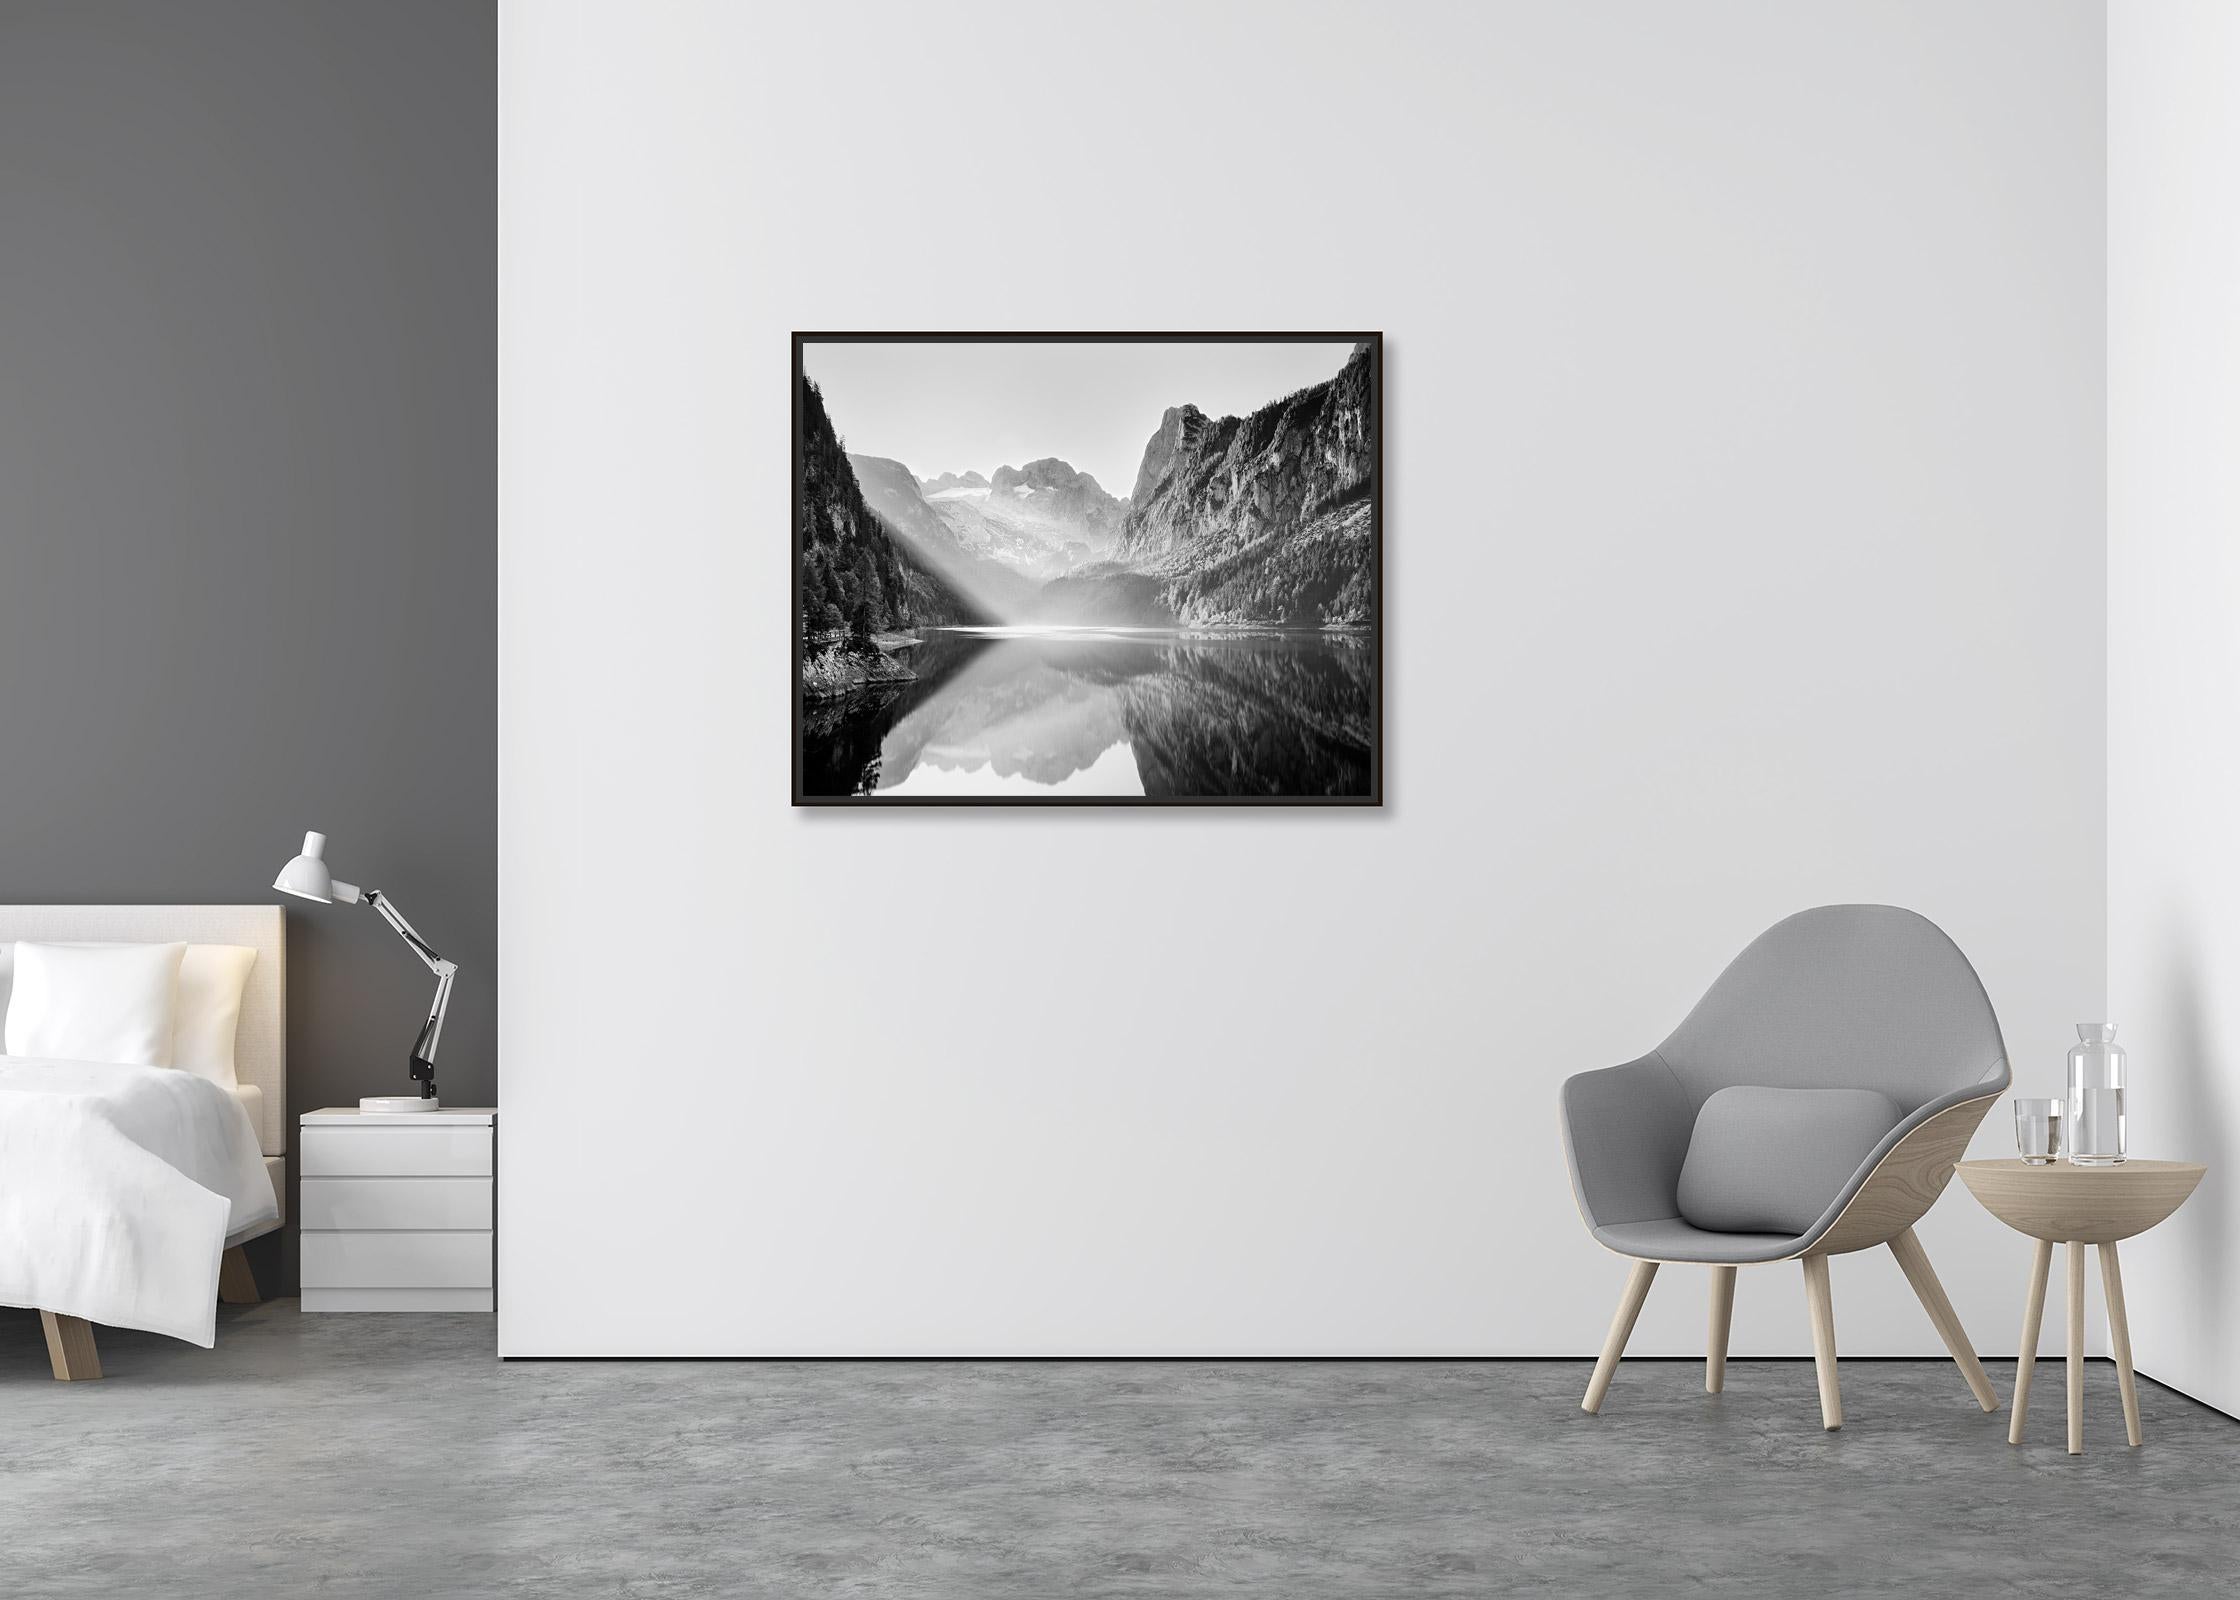 Illumination, mountain lake, black and white long exposure landscape photography - Contemporary Photograph by Gerald Berghammer